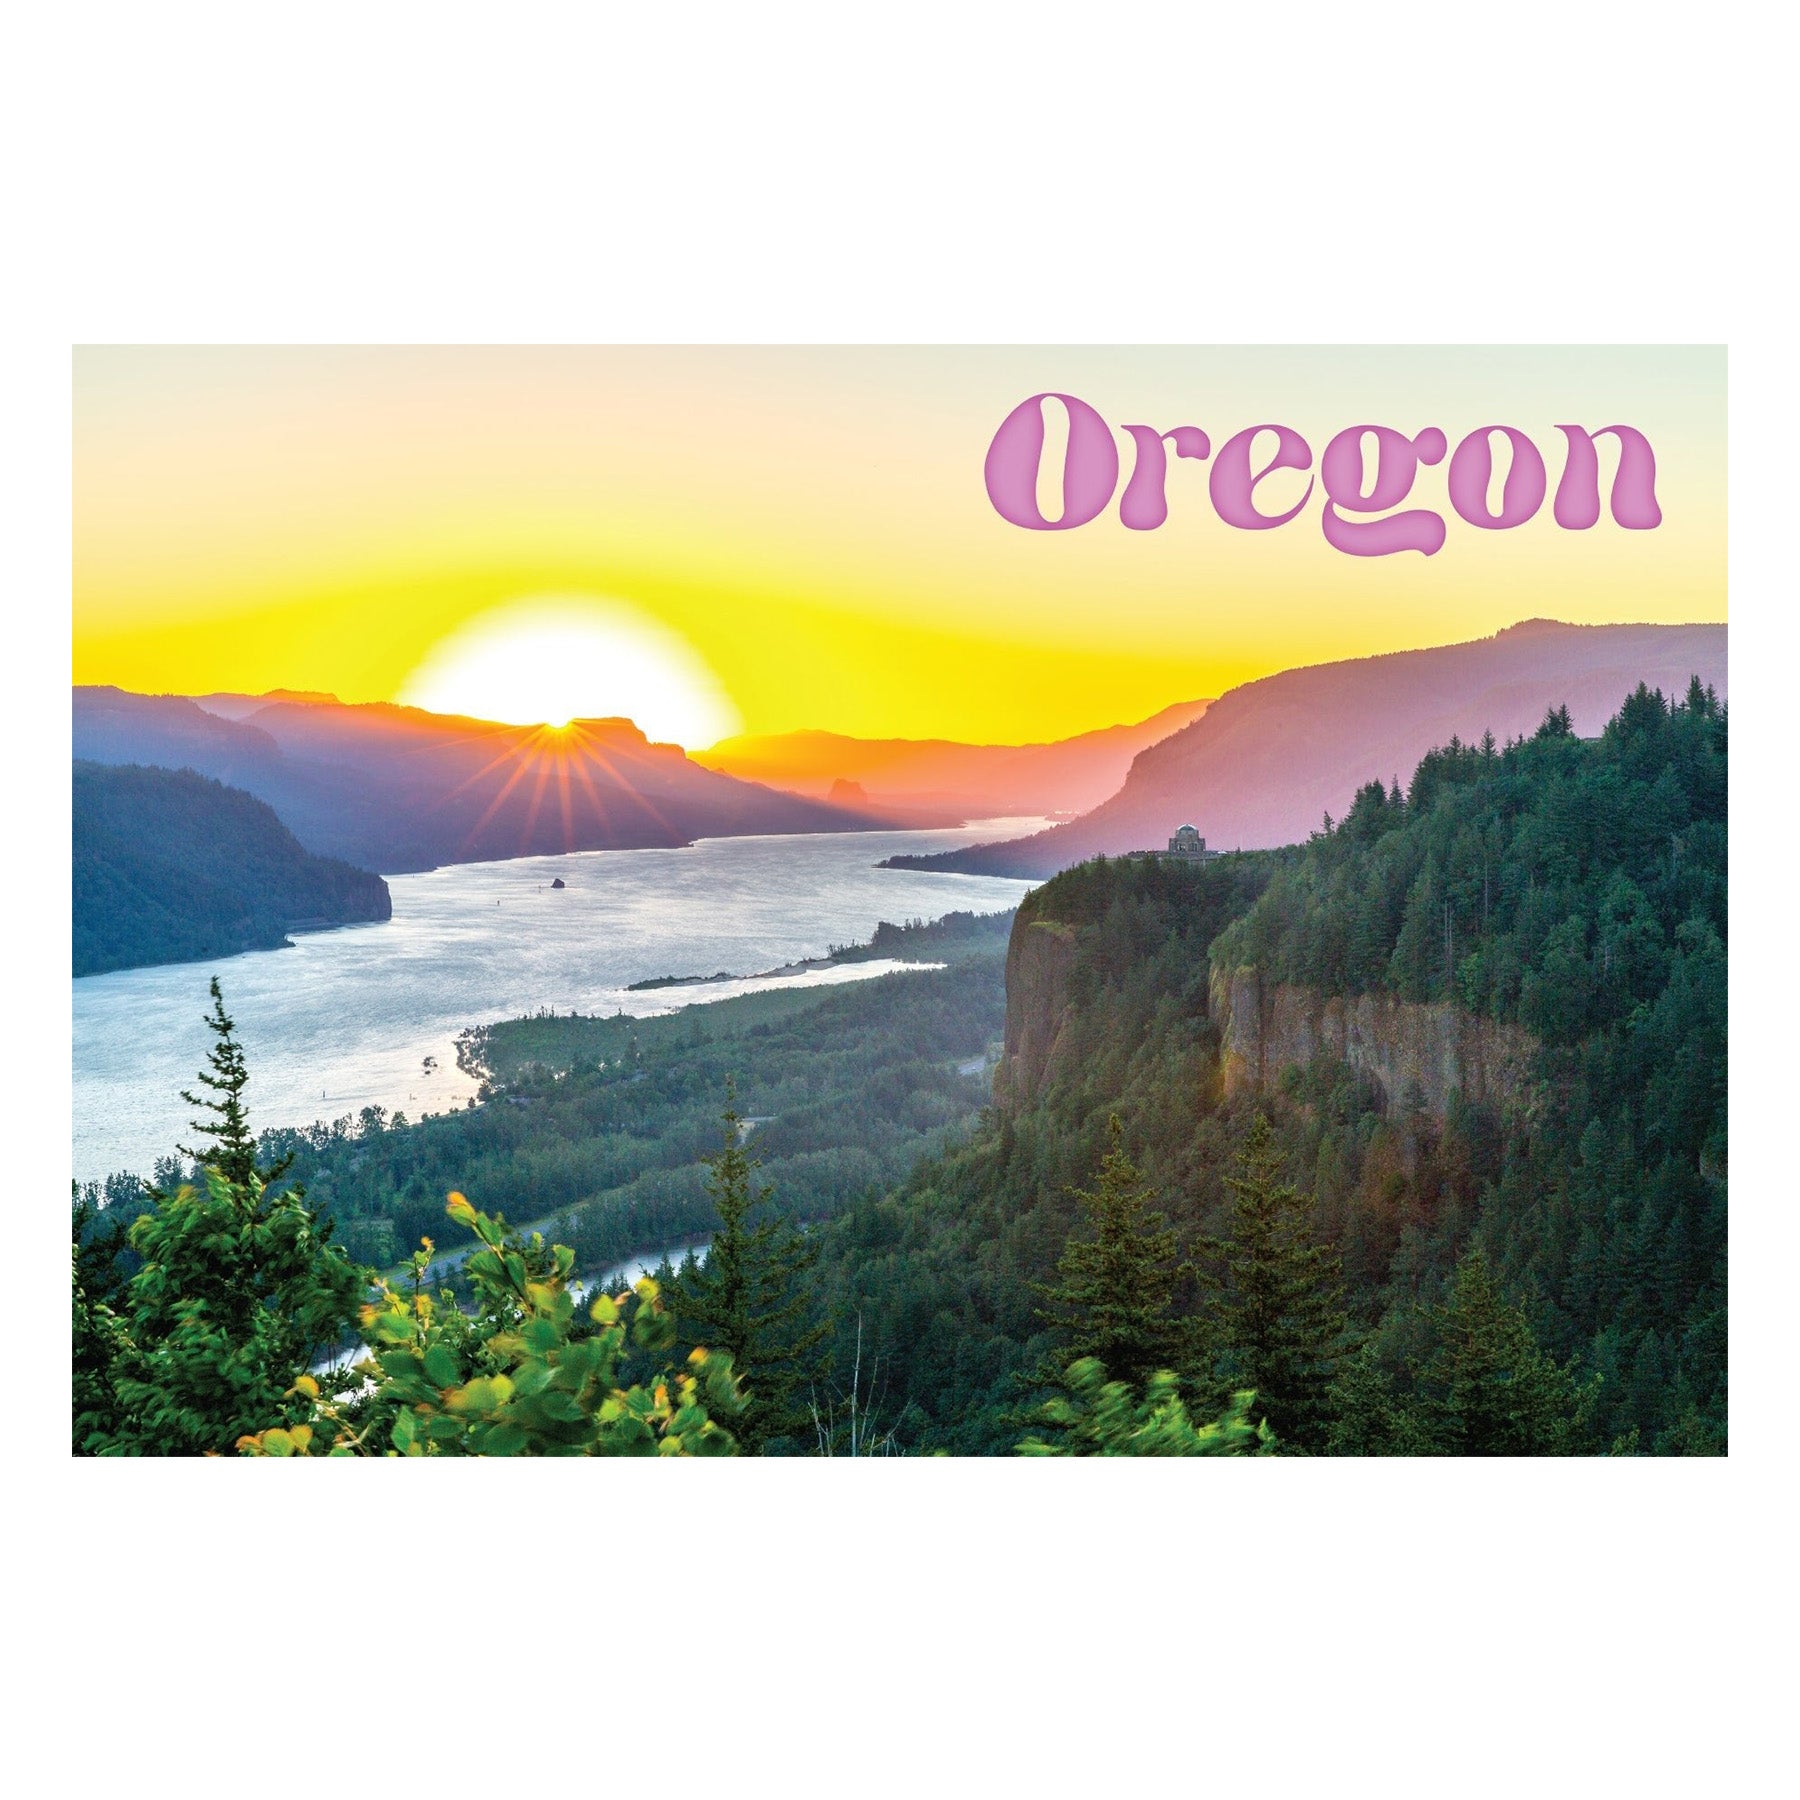 The Gorge Postcard - Postcards - Hello From Oregon